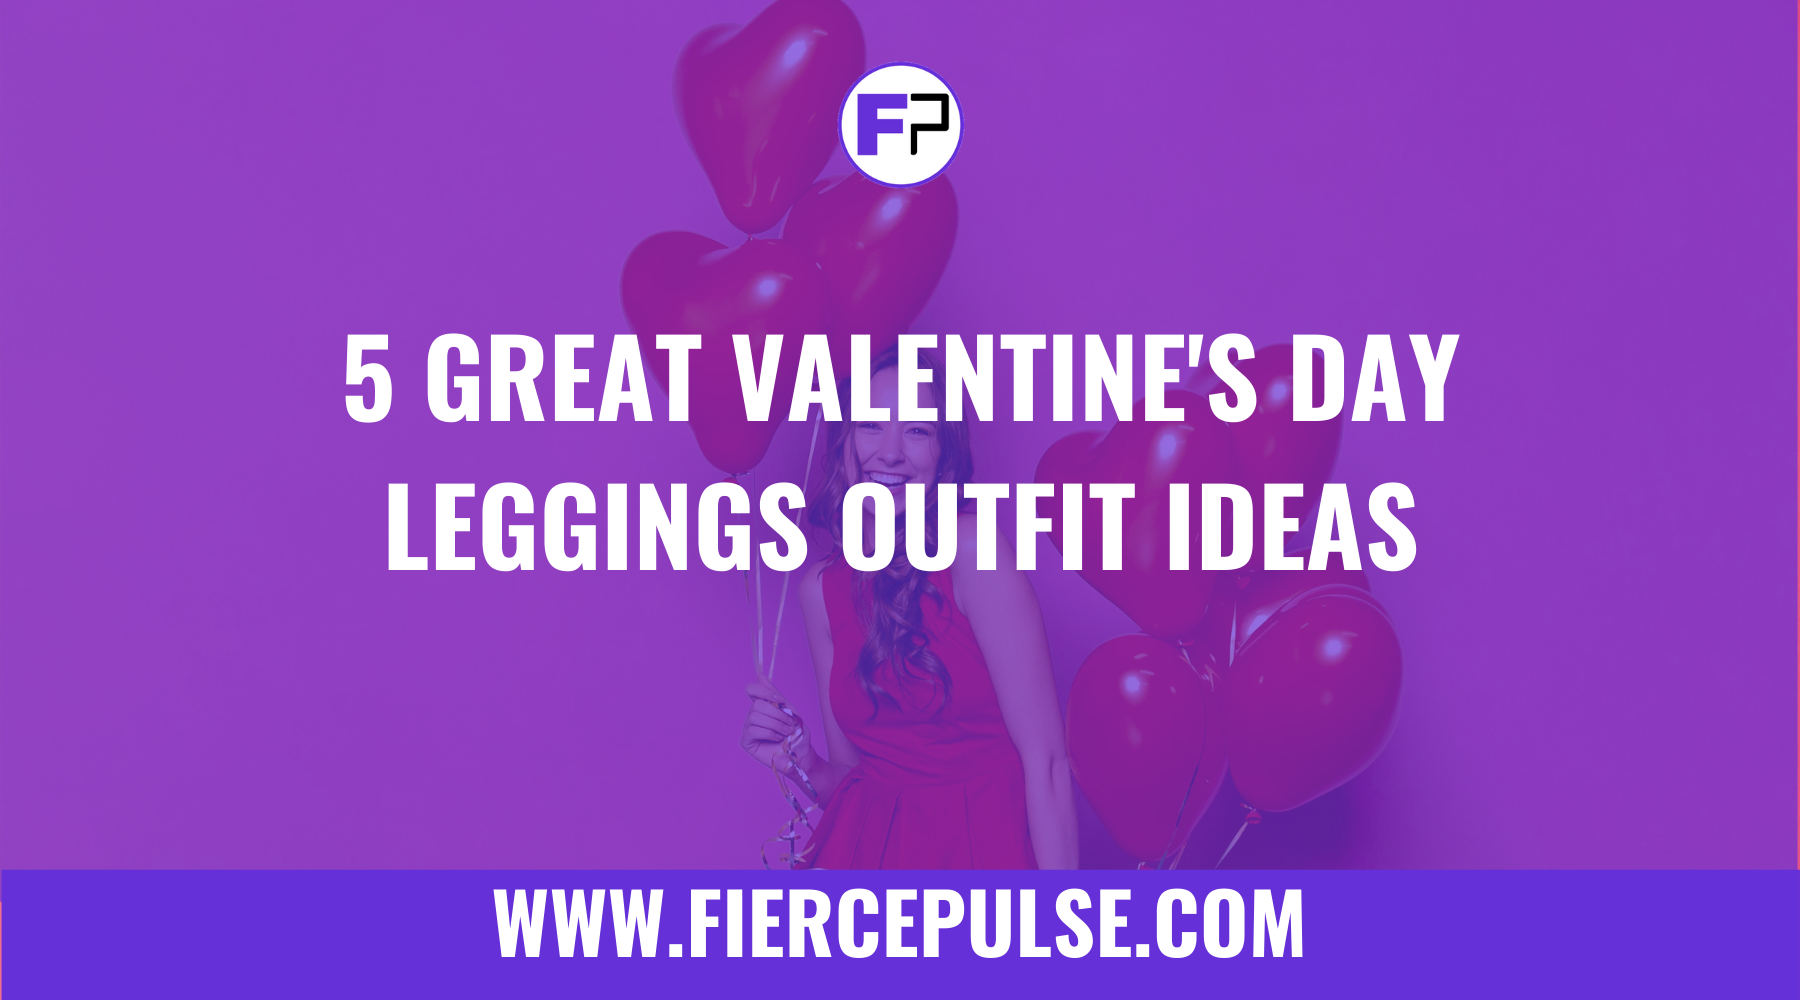 5 Great Valentine’s Day Leggings Outfit Ideas